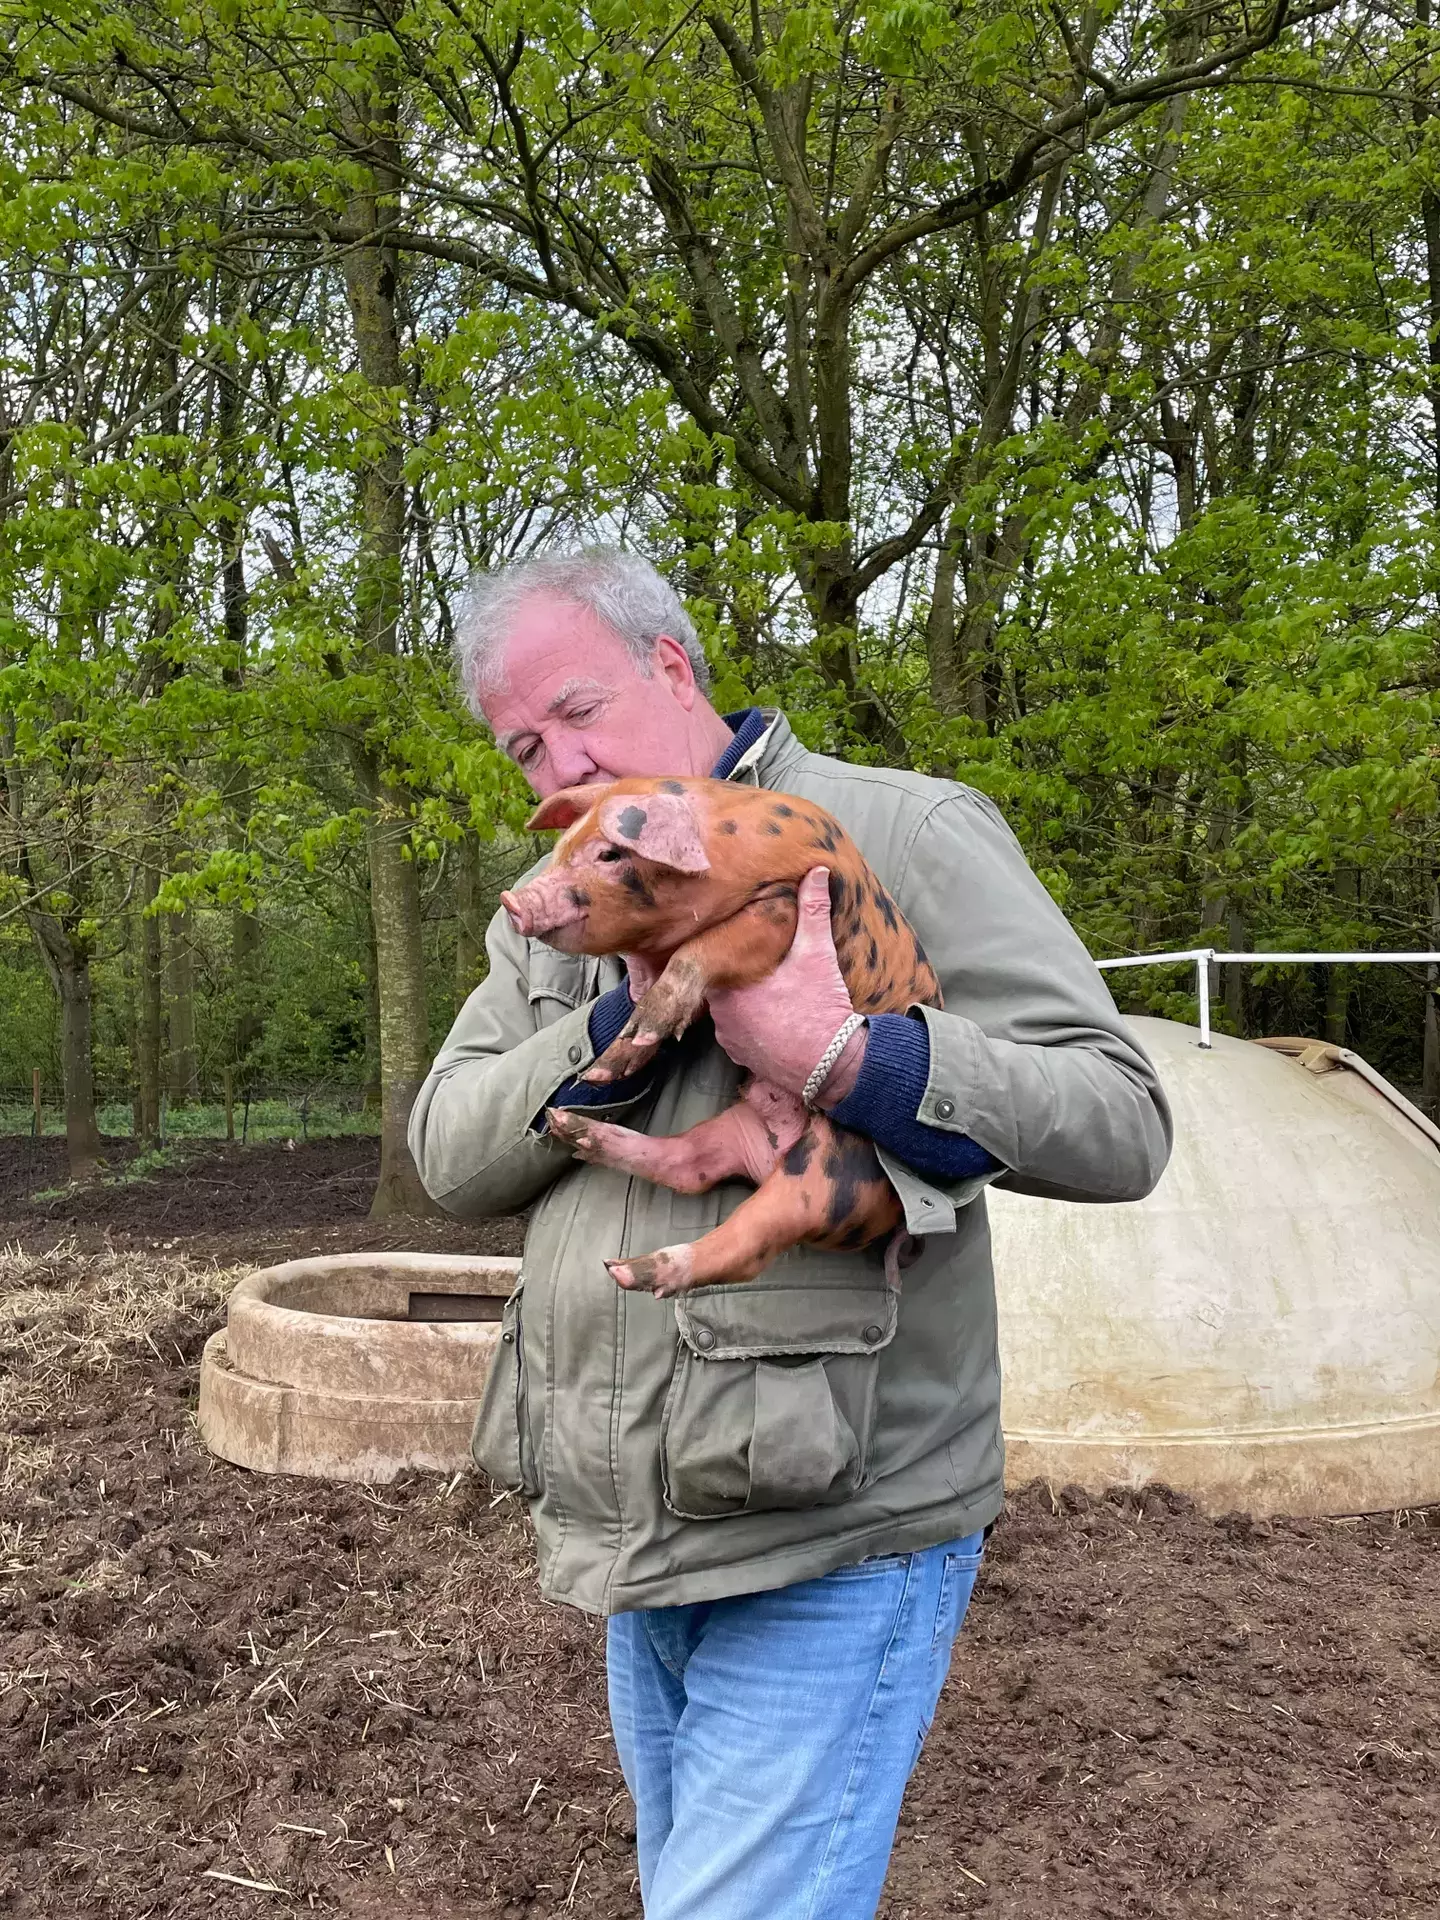 Jeremy Clarkson has become very attached to his piglets. (LADbible)